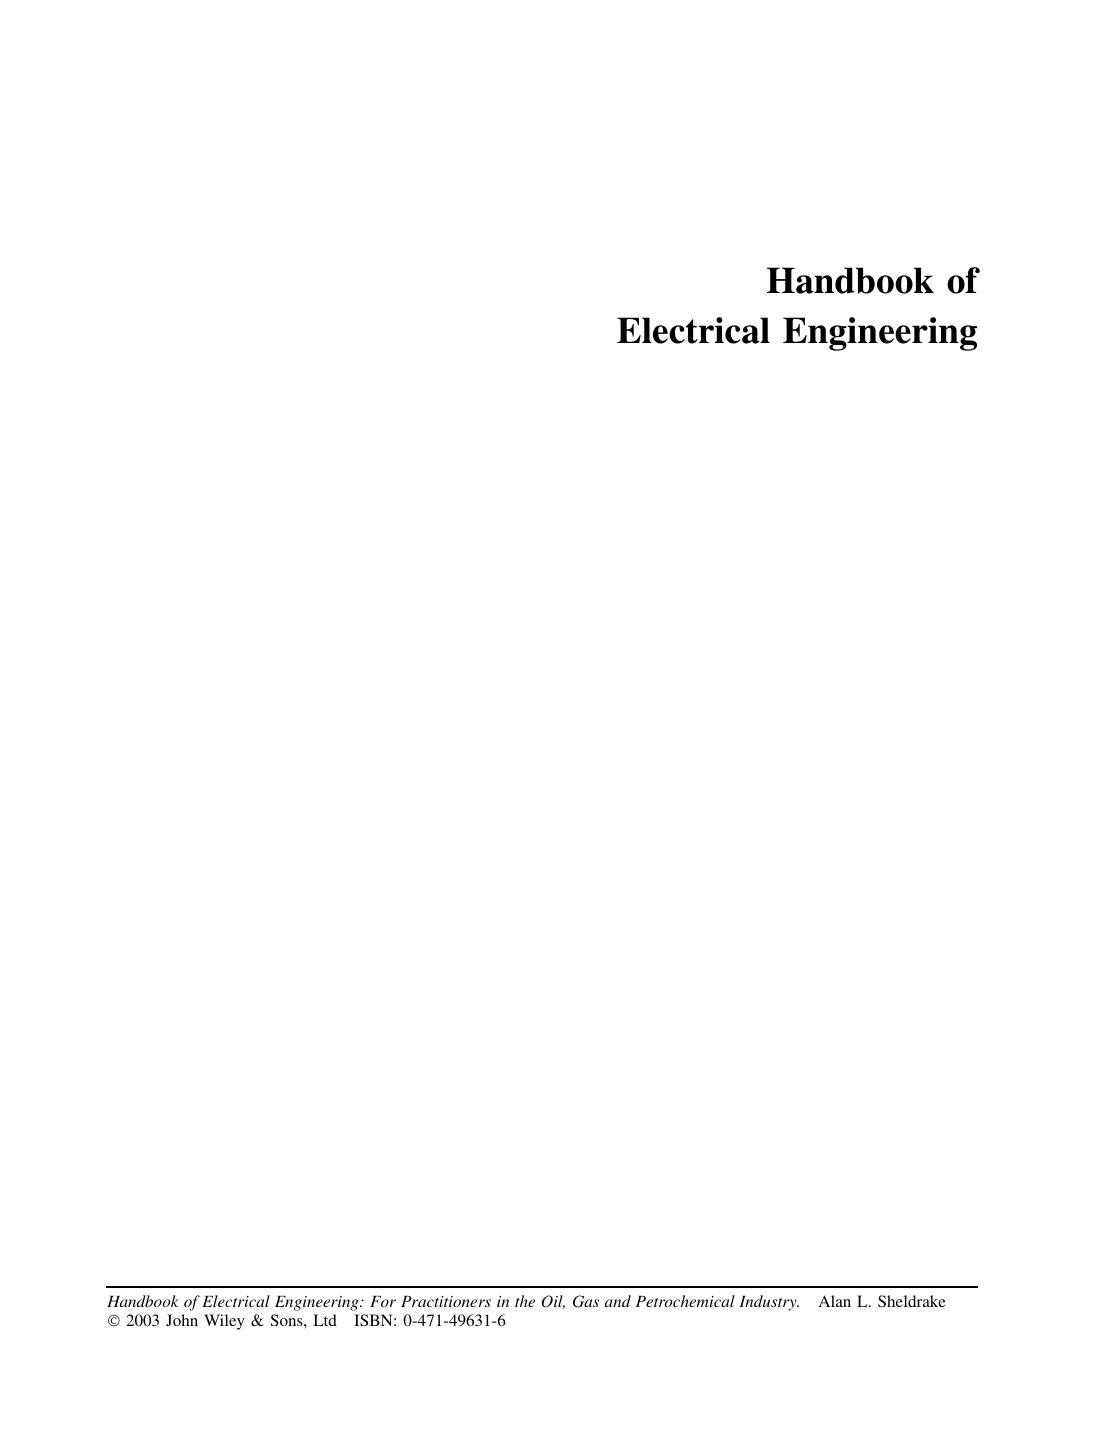 Handbook of electrical engineering  for practitioners in the oil, gas, and petrochemical 2003.pdf